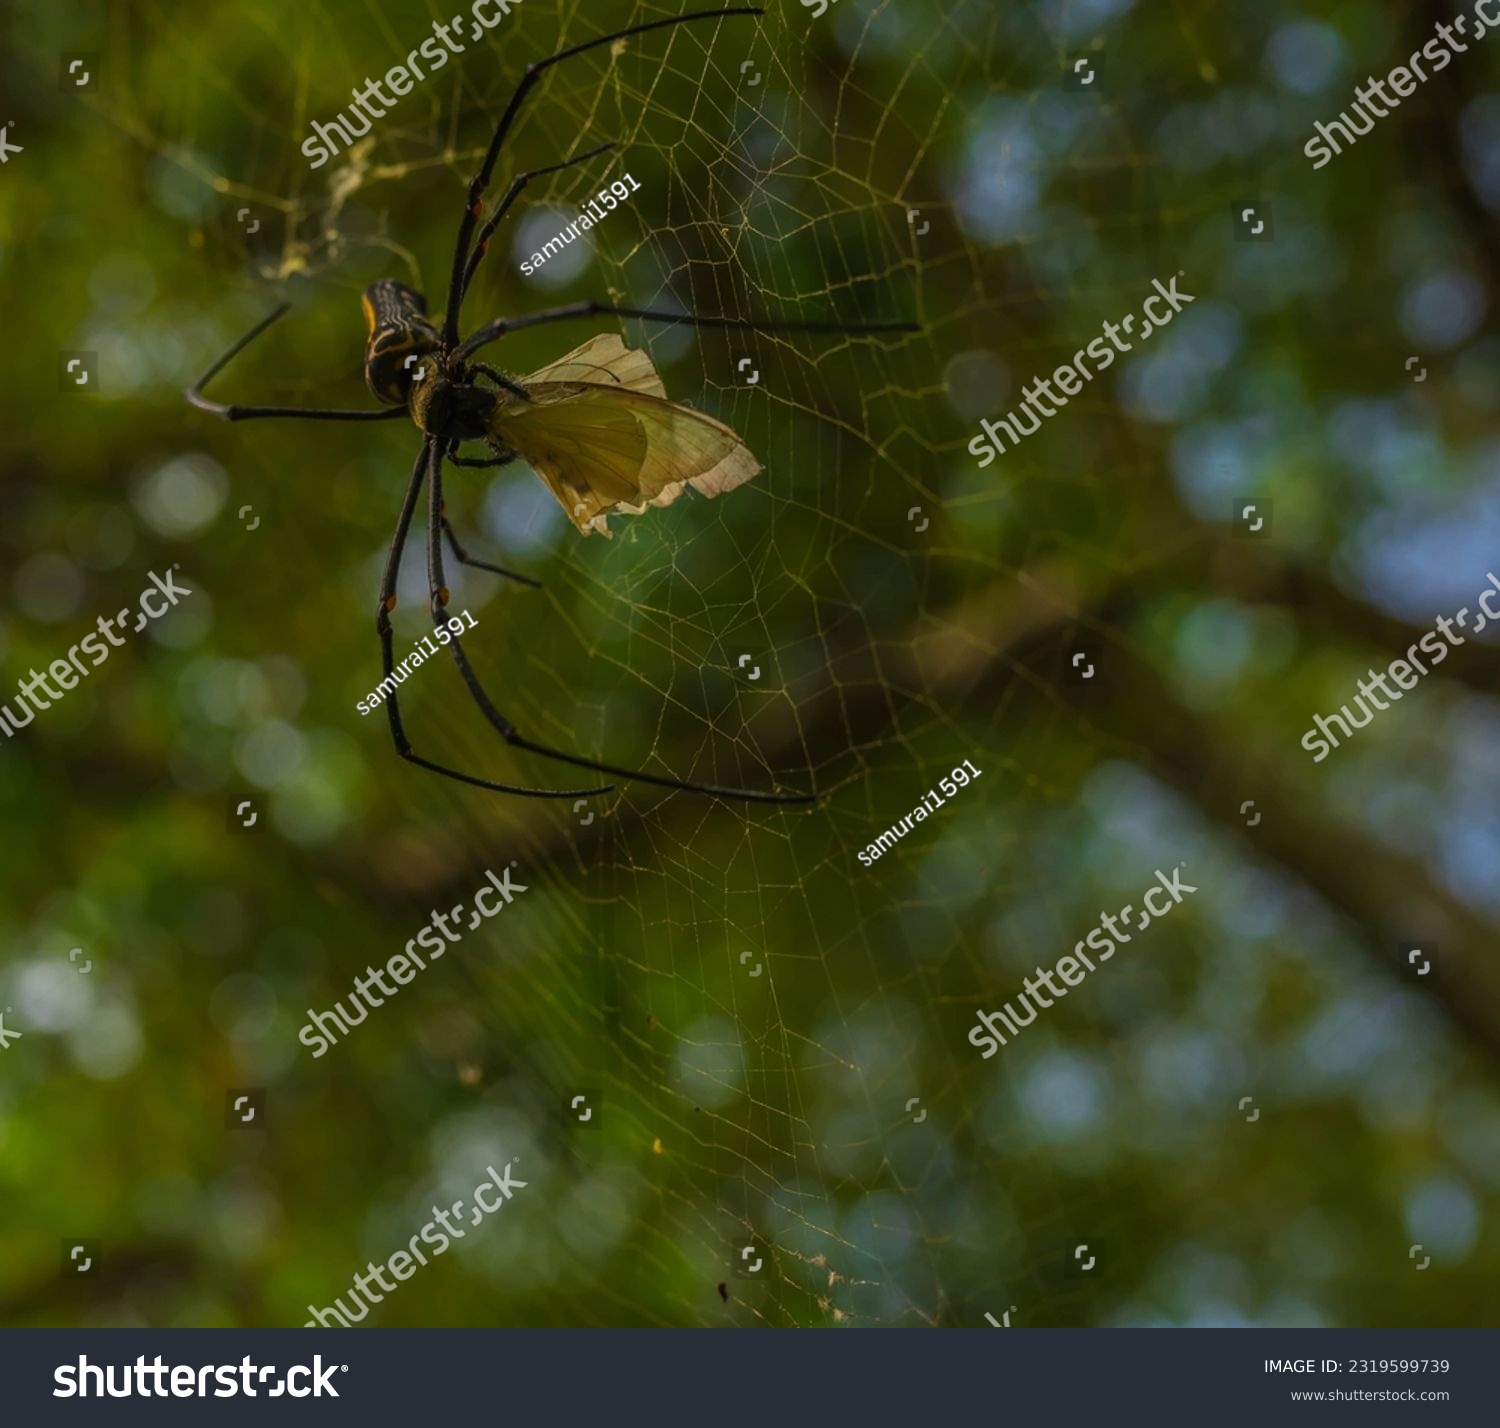 Came across this forest spider successfully hunting down its prey while trekking through a forest in Madurai, Tamil Nadu. Shot on 28th Sep, 2021. #2319599739